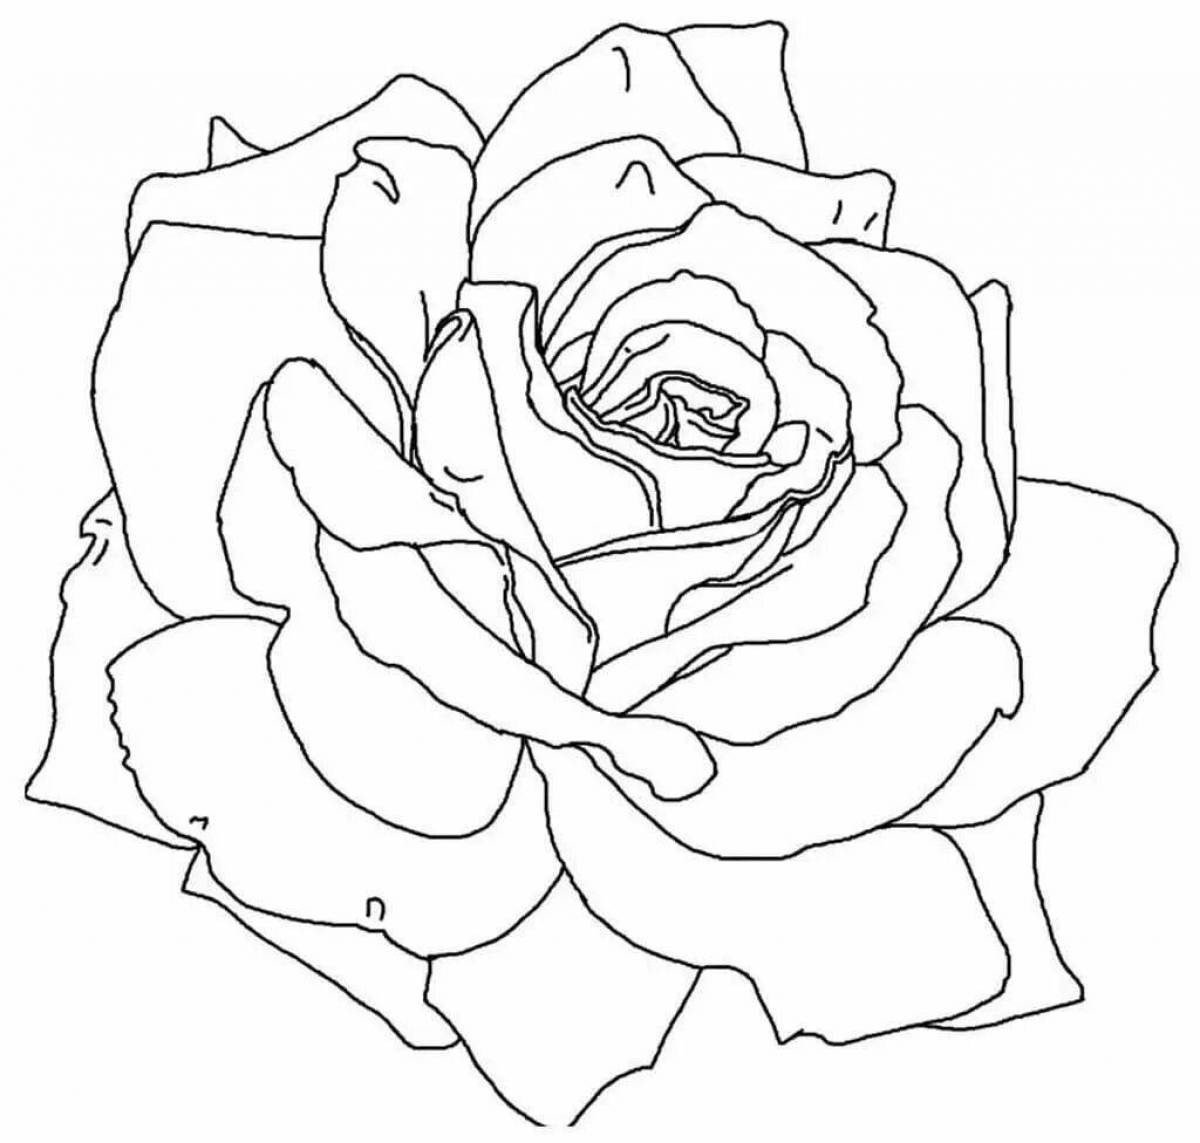 Colourful rose coloring book